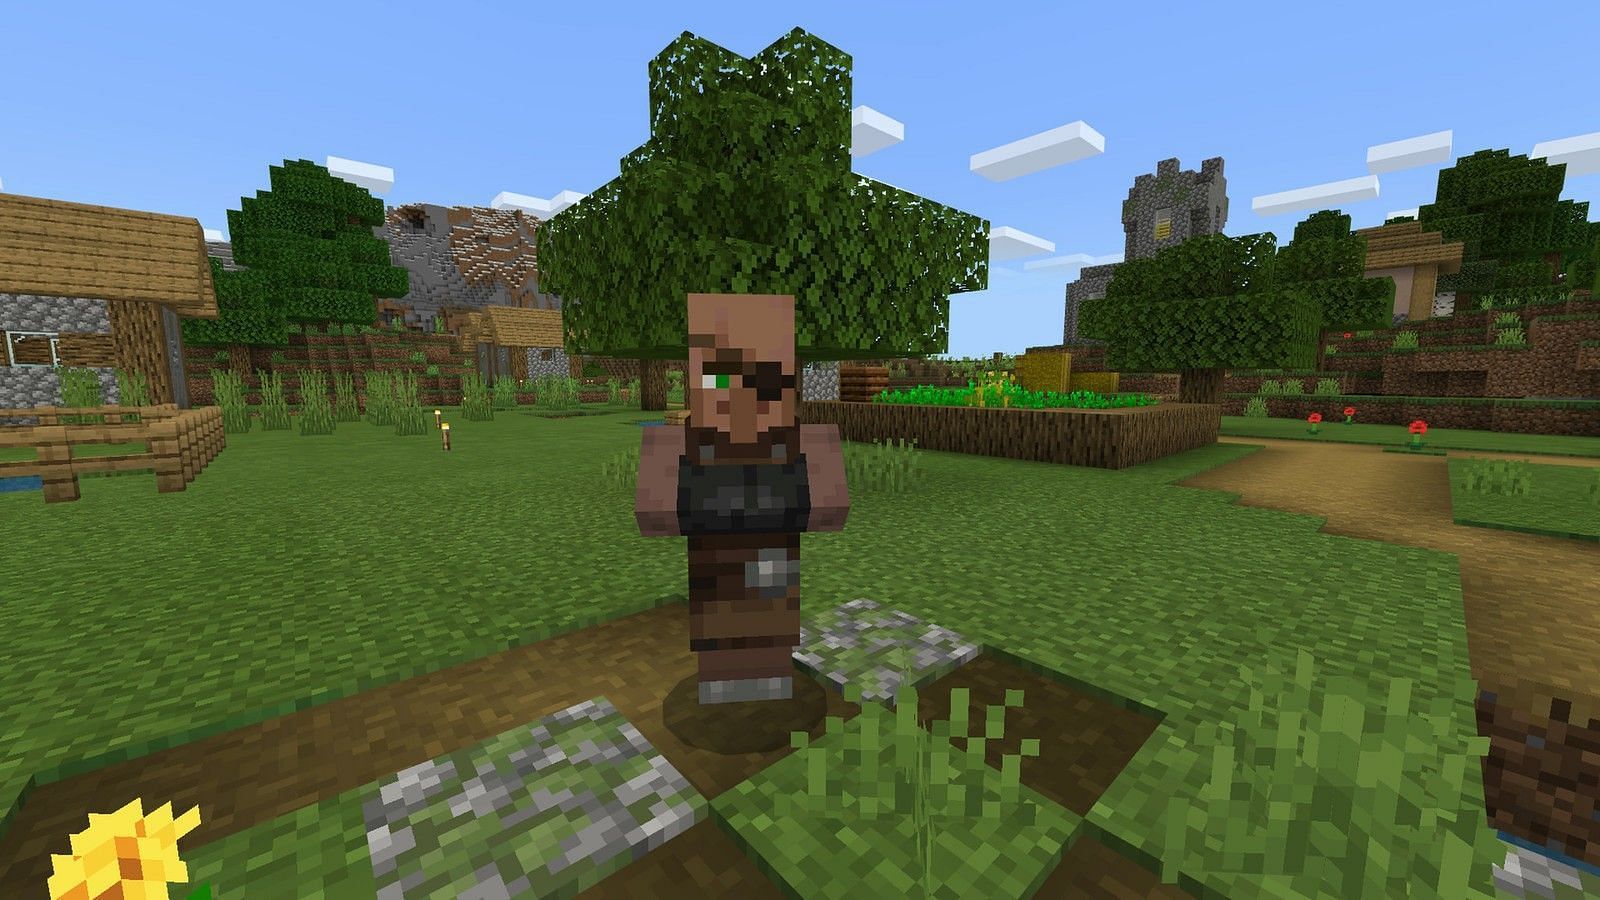 Weaponsmith villager in Minecraft (Image via WindowsCentral)